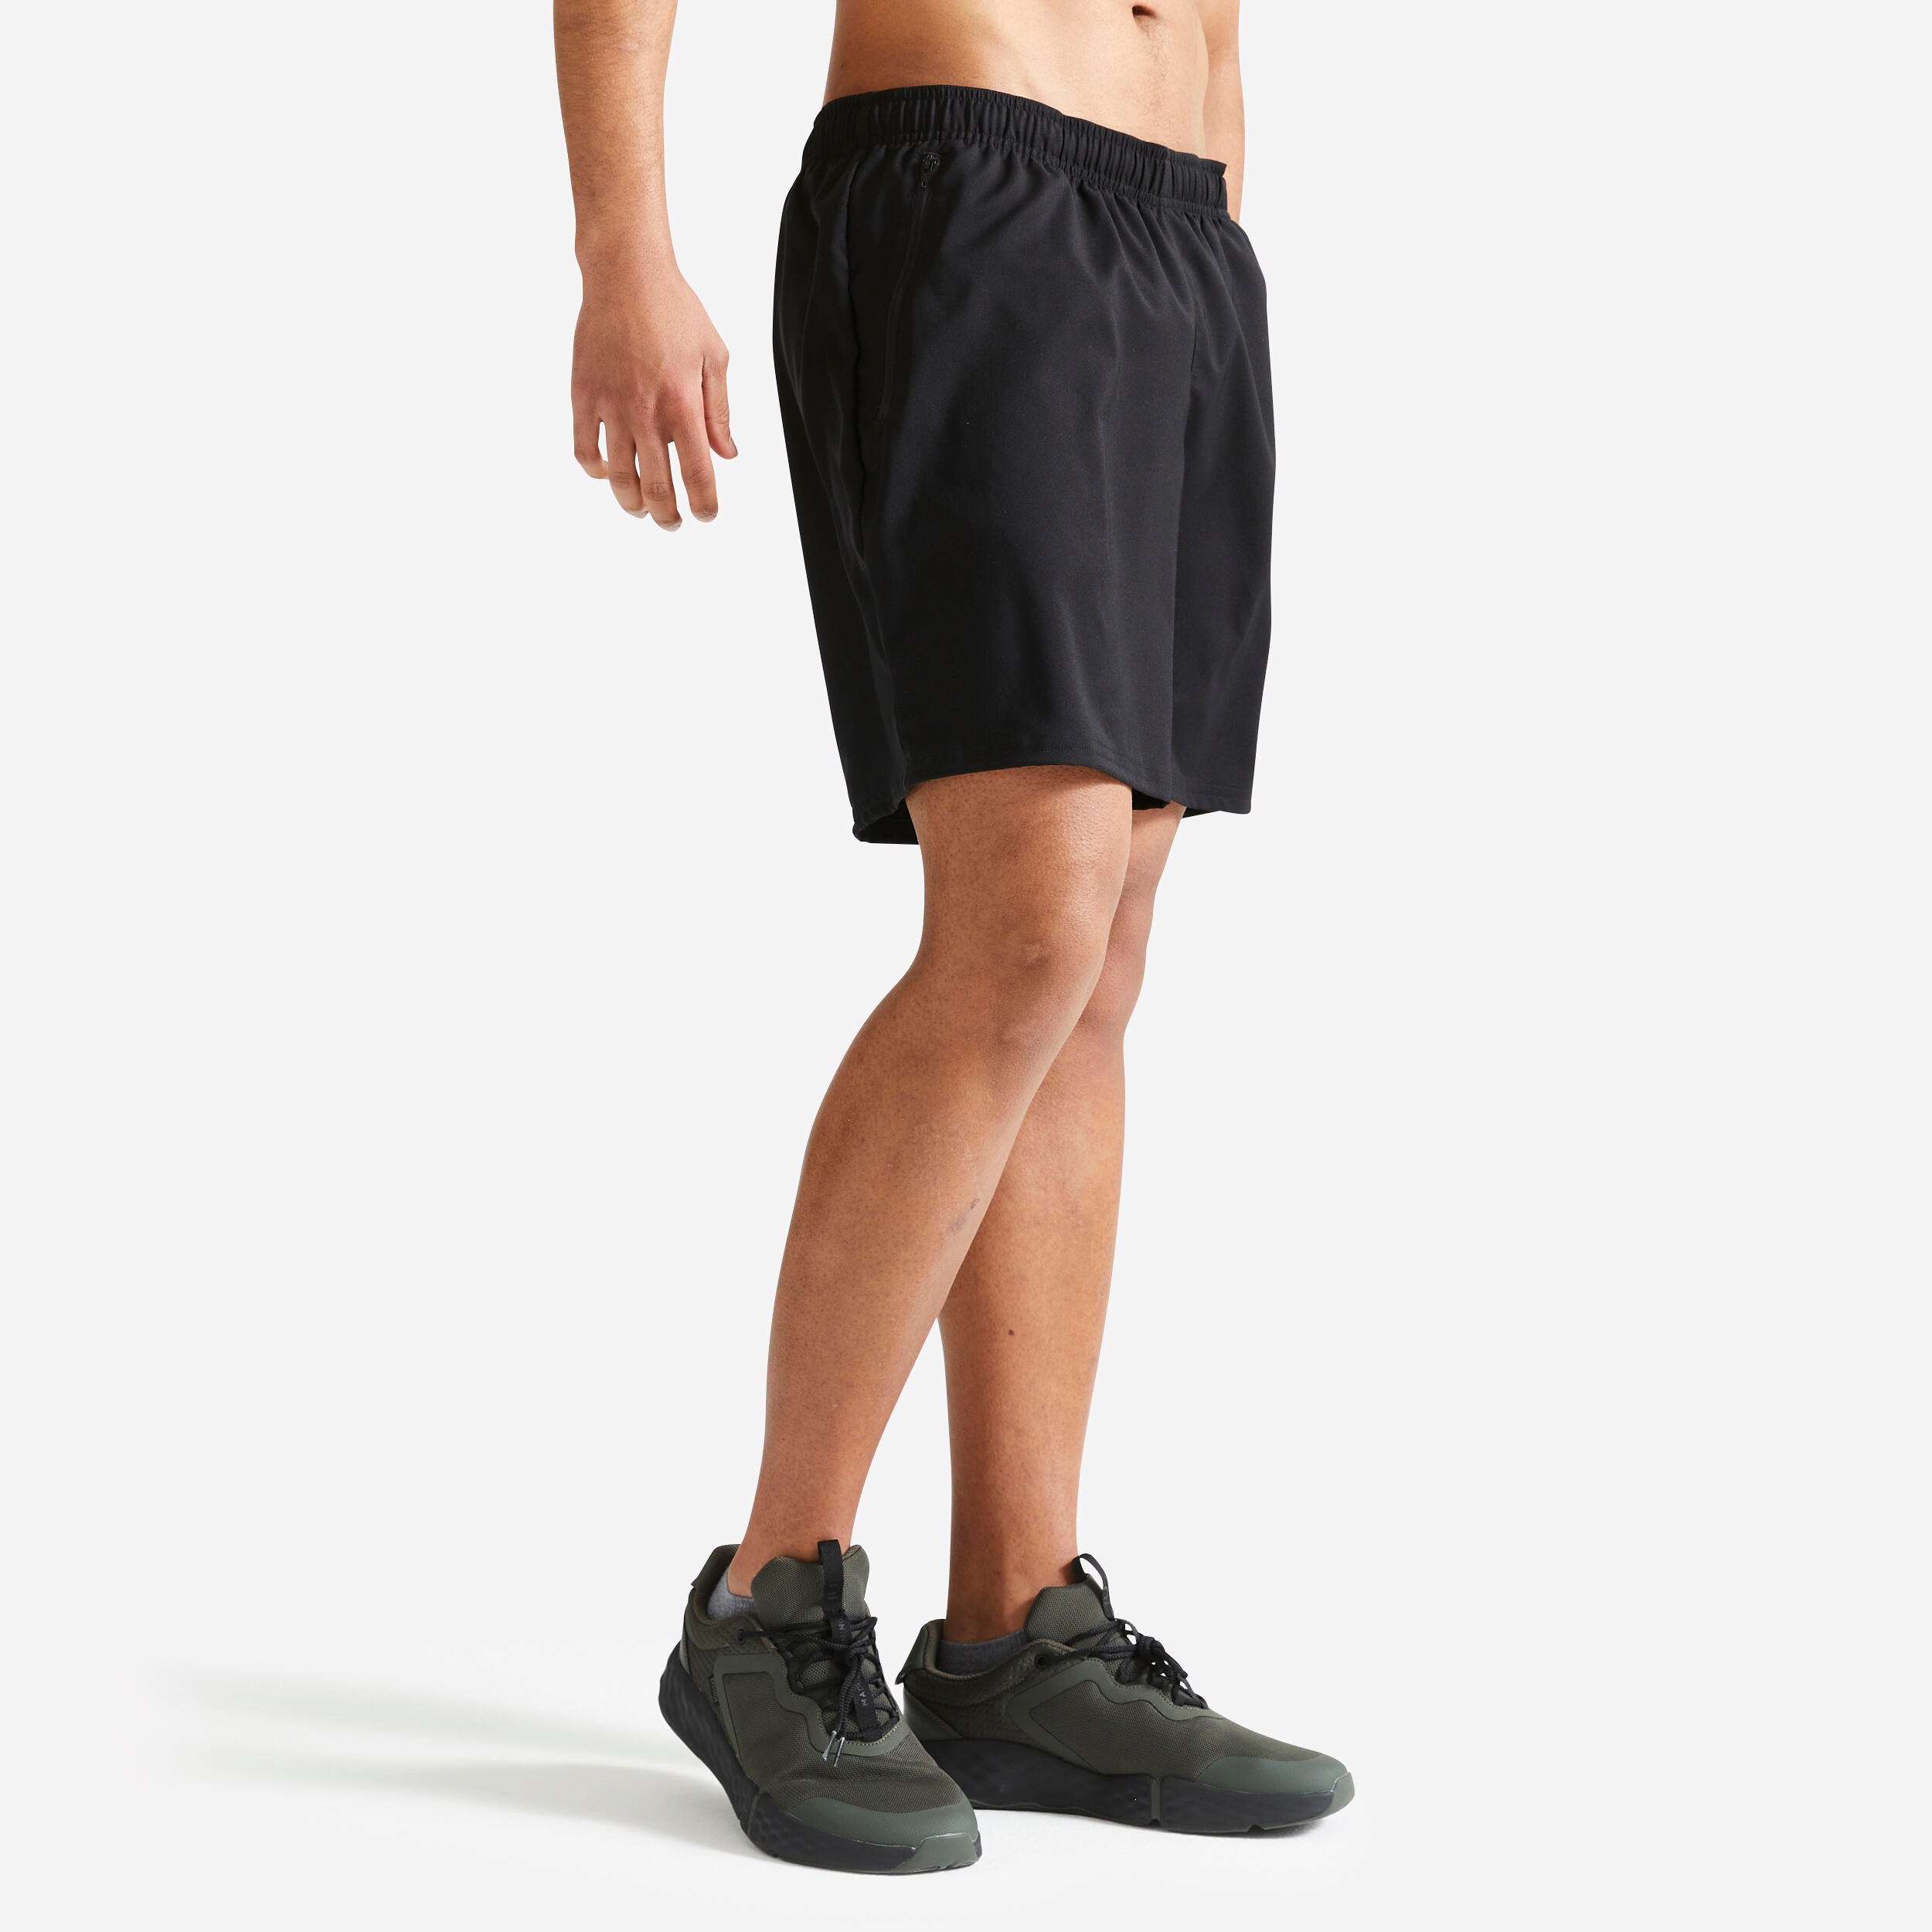 Men's Breathable Breathable Fitness Shorts - Black 1/6